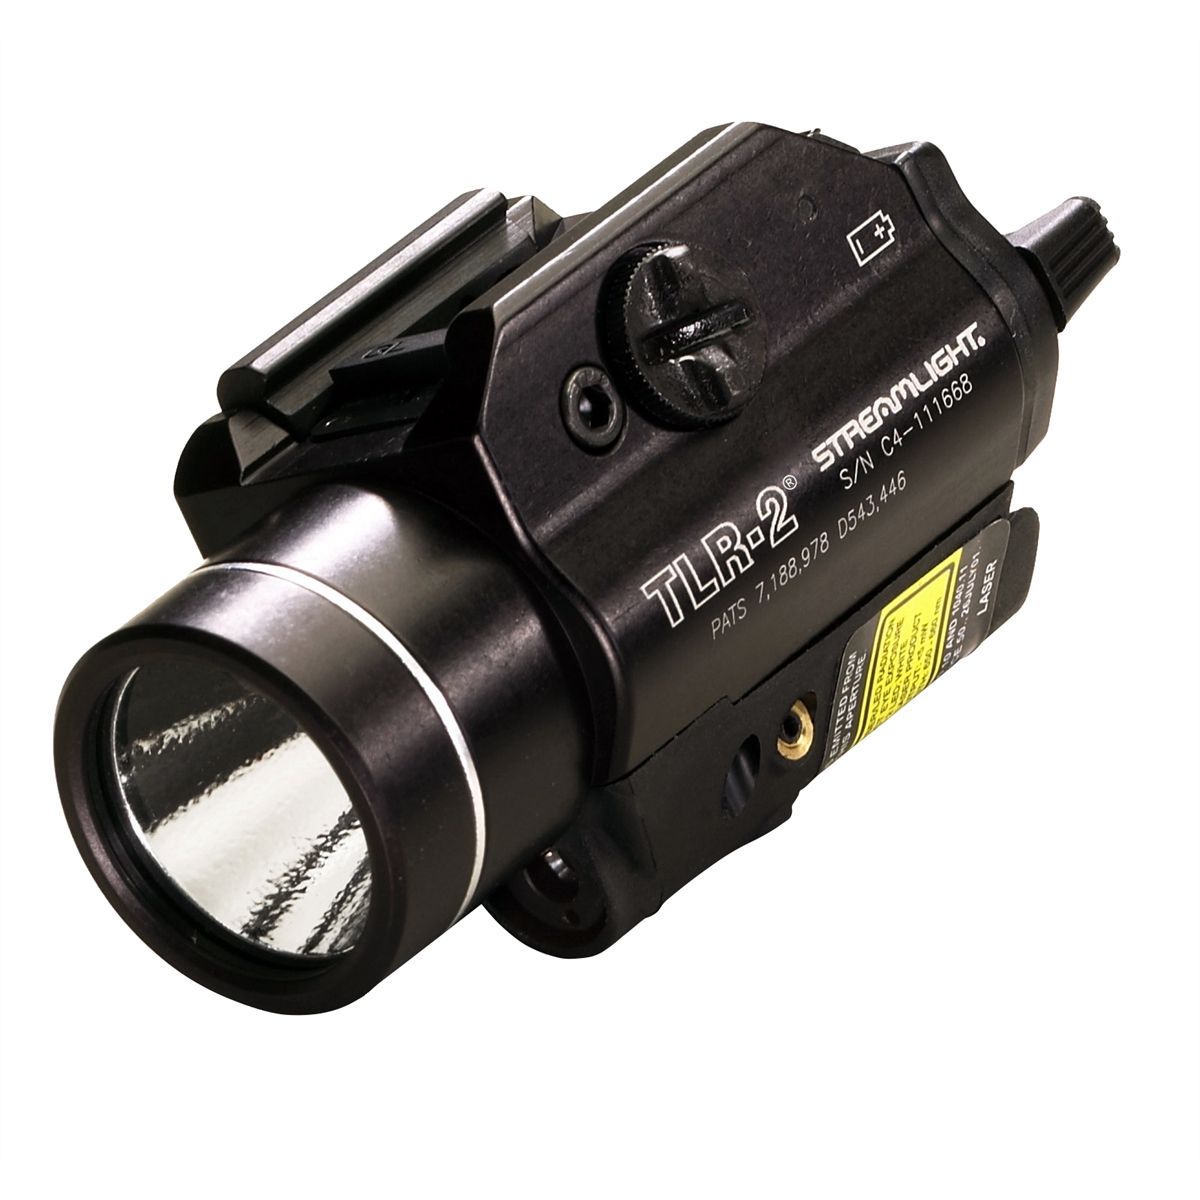 TLR-2 Rail Mounted Tactical Light w/ Laser Sight